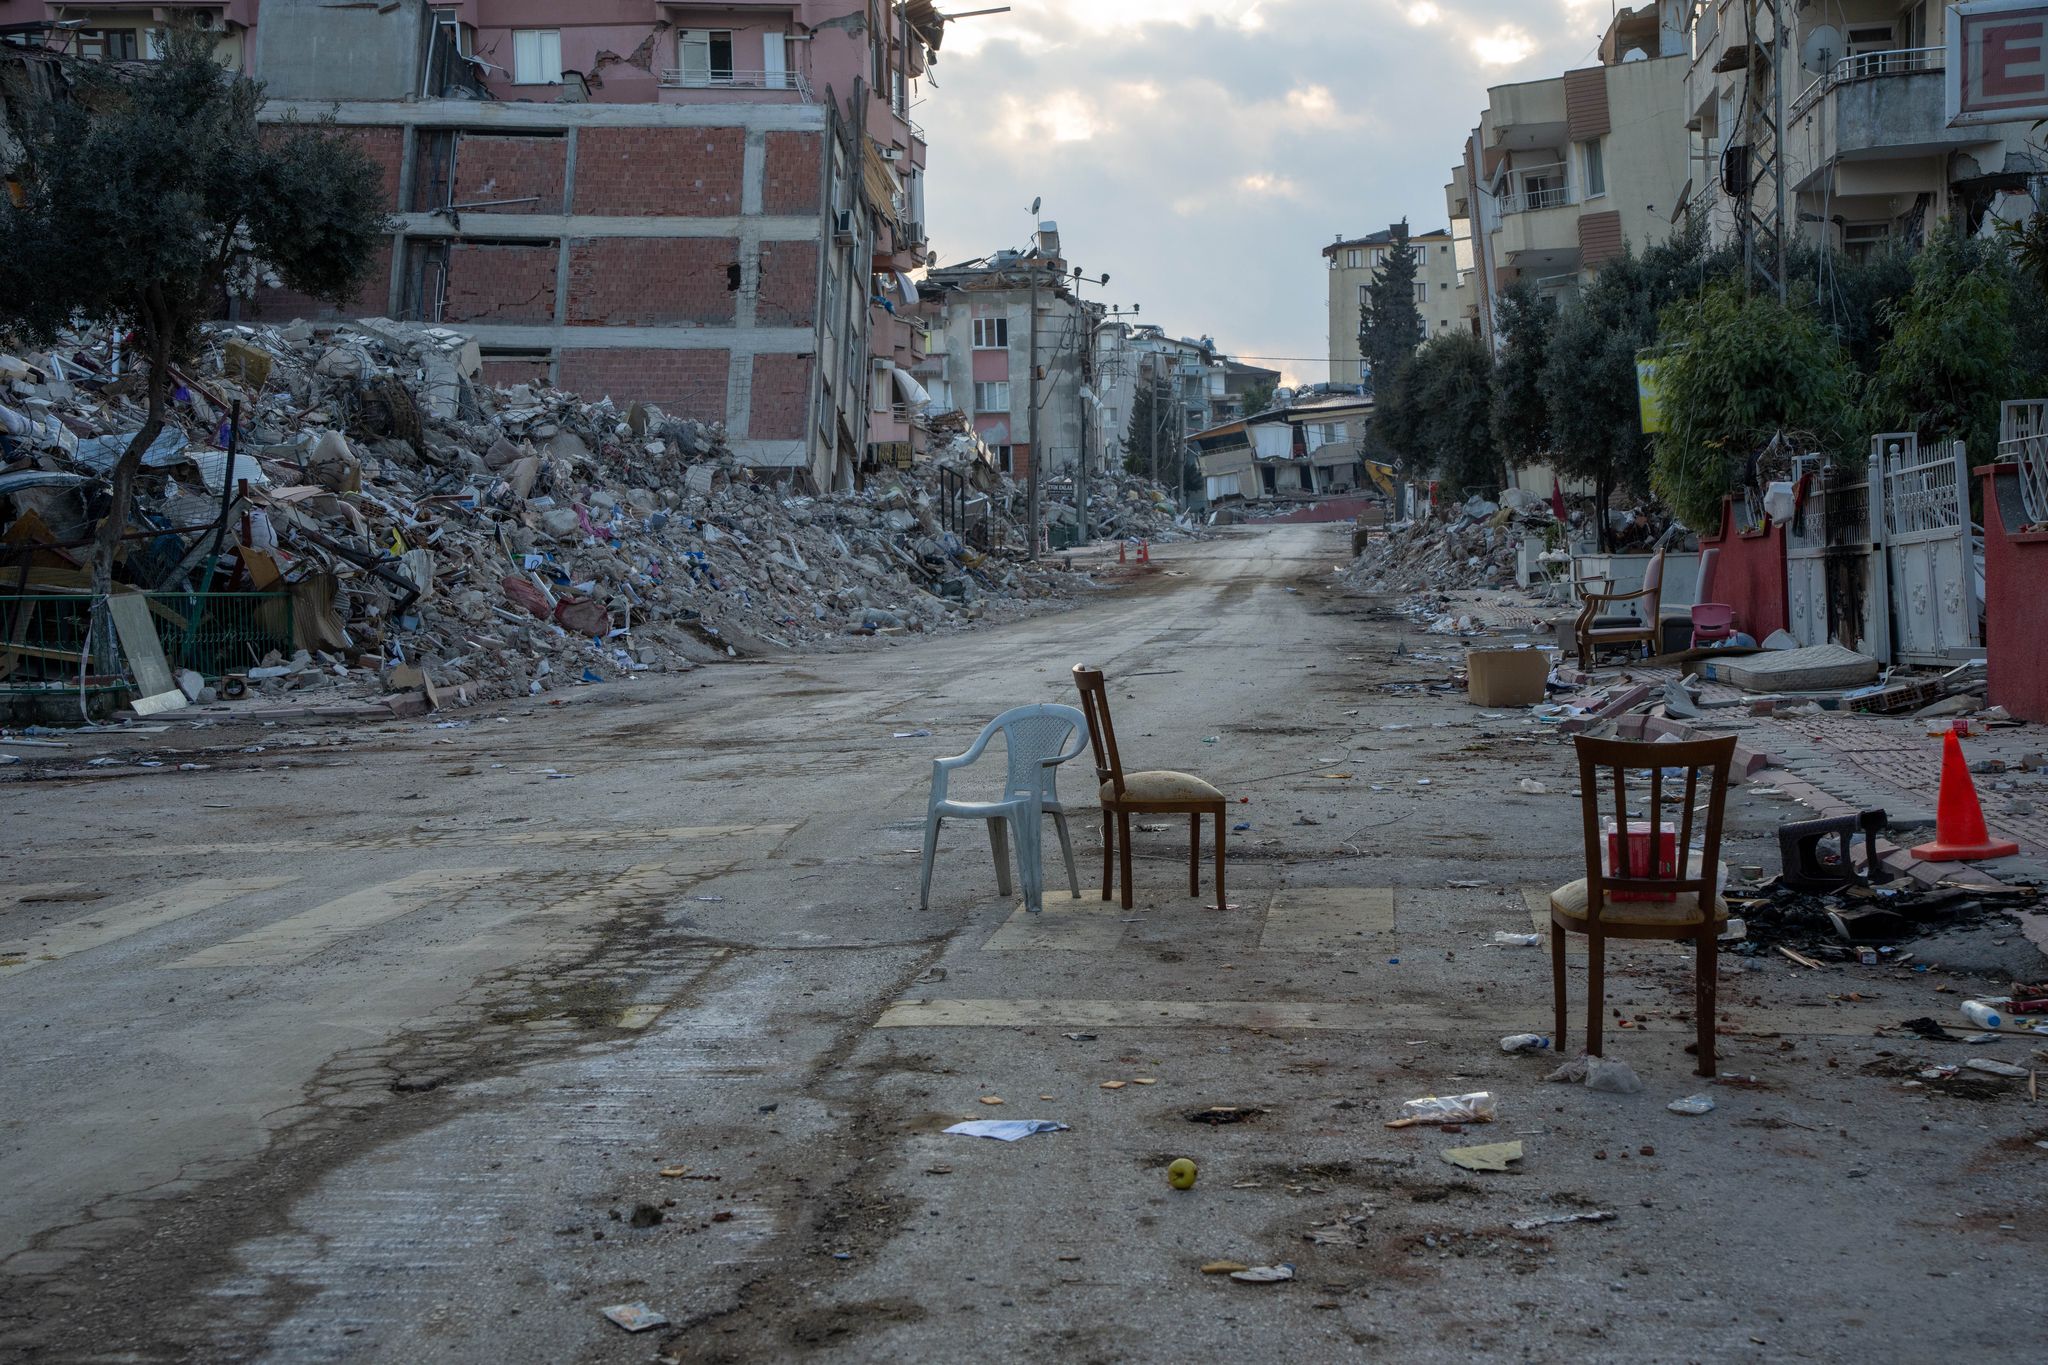 2023 antakya turkey chairs are scattered around the sites of collapsed buildings where family members kept vigil waiting for rescue workers to discover the remains of loved ones, or in rare cases, find them alive on february 6, 2023, a 78 magnitude earthquake hit central and southern turkey, and northern syria it was followed by a 77 magnitude earthquake it is estimated that there were 45,000 deaths in turkey, and approximately 7,000 in syria